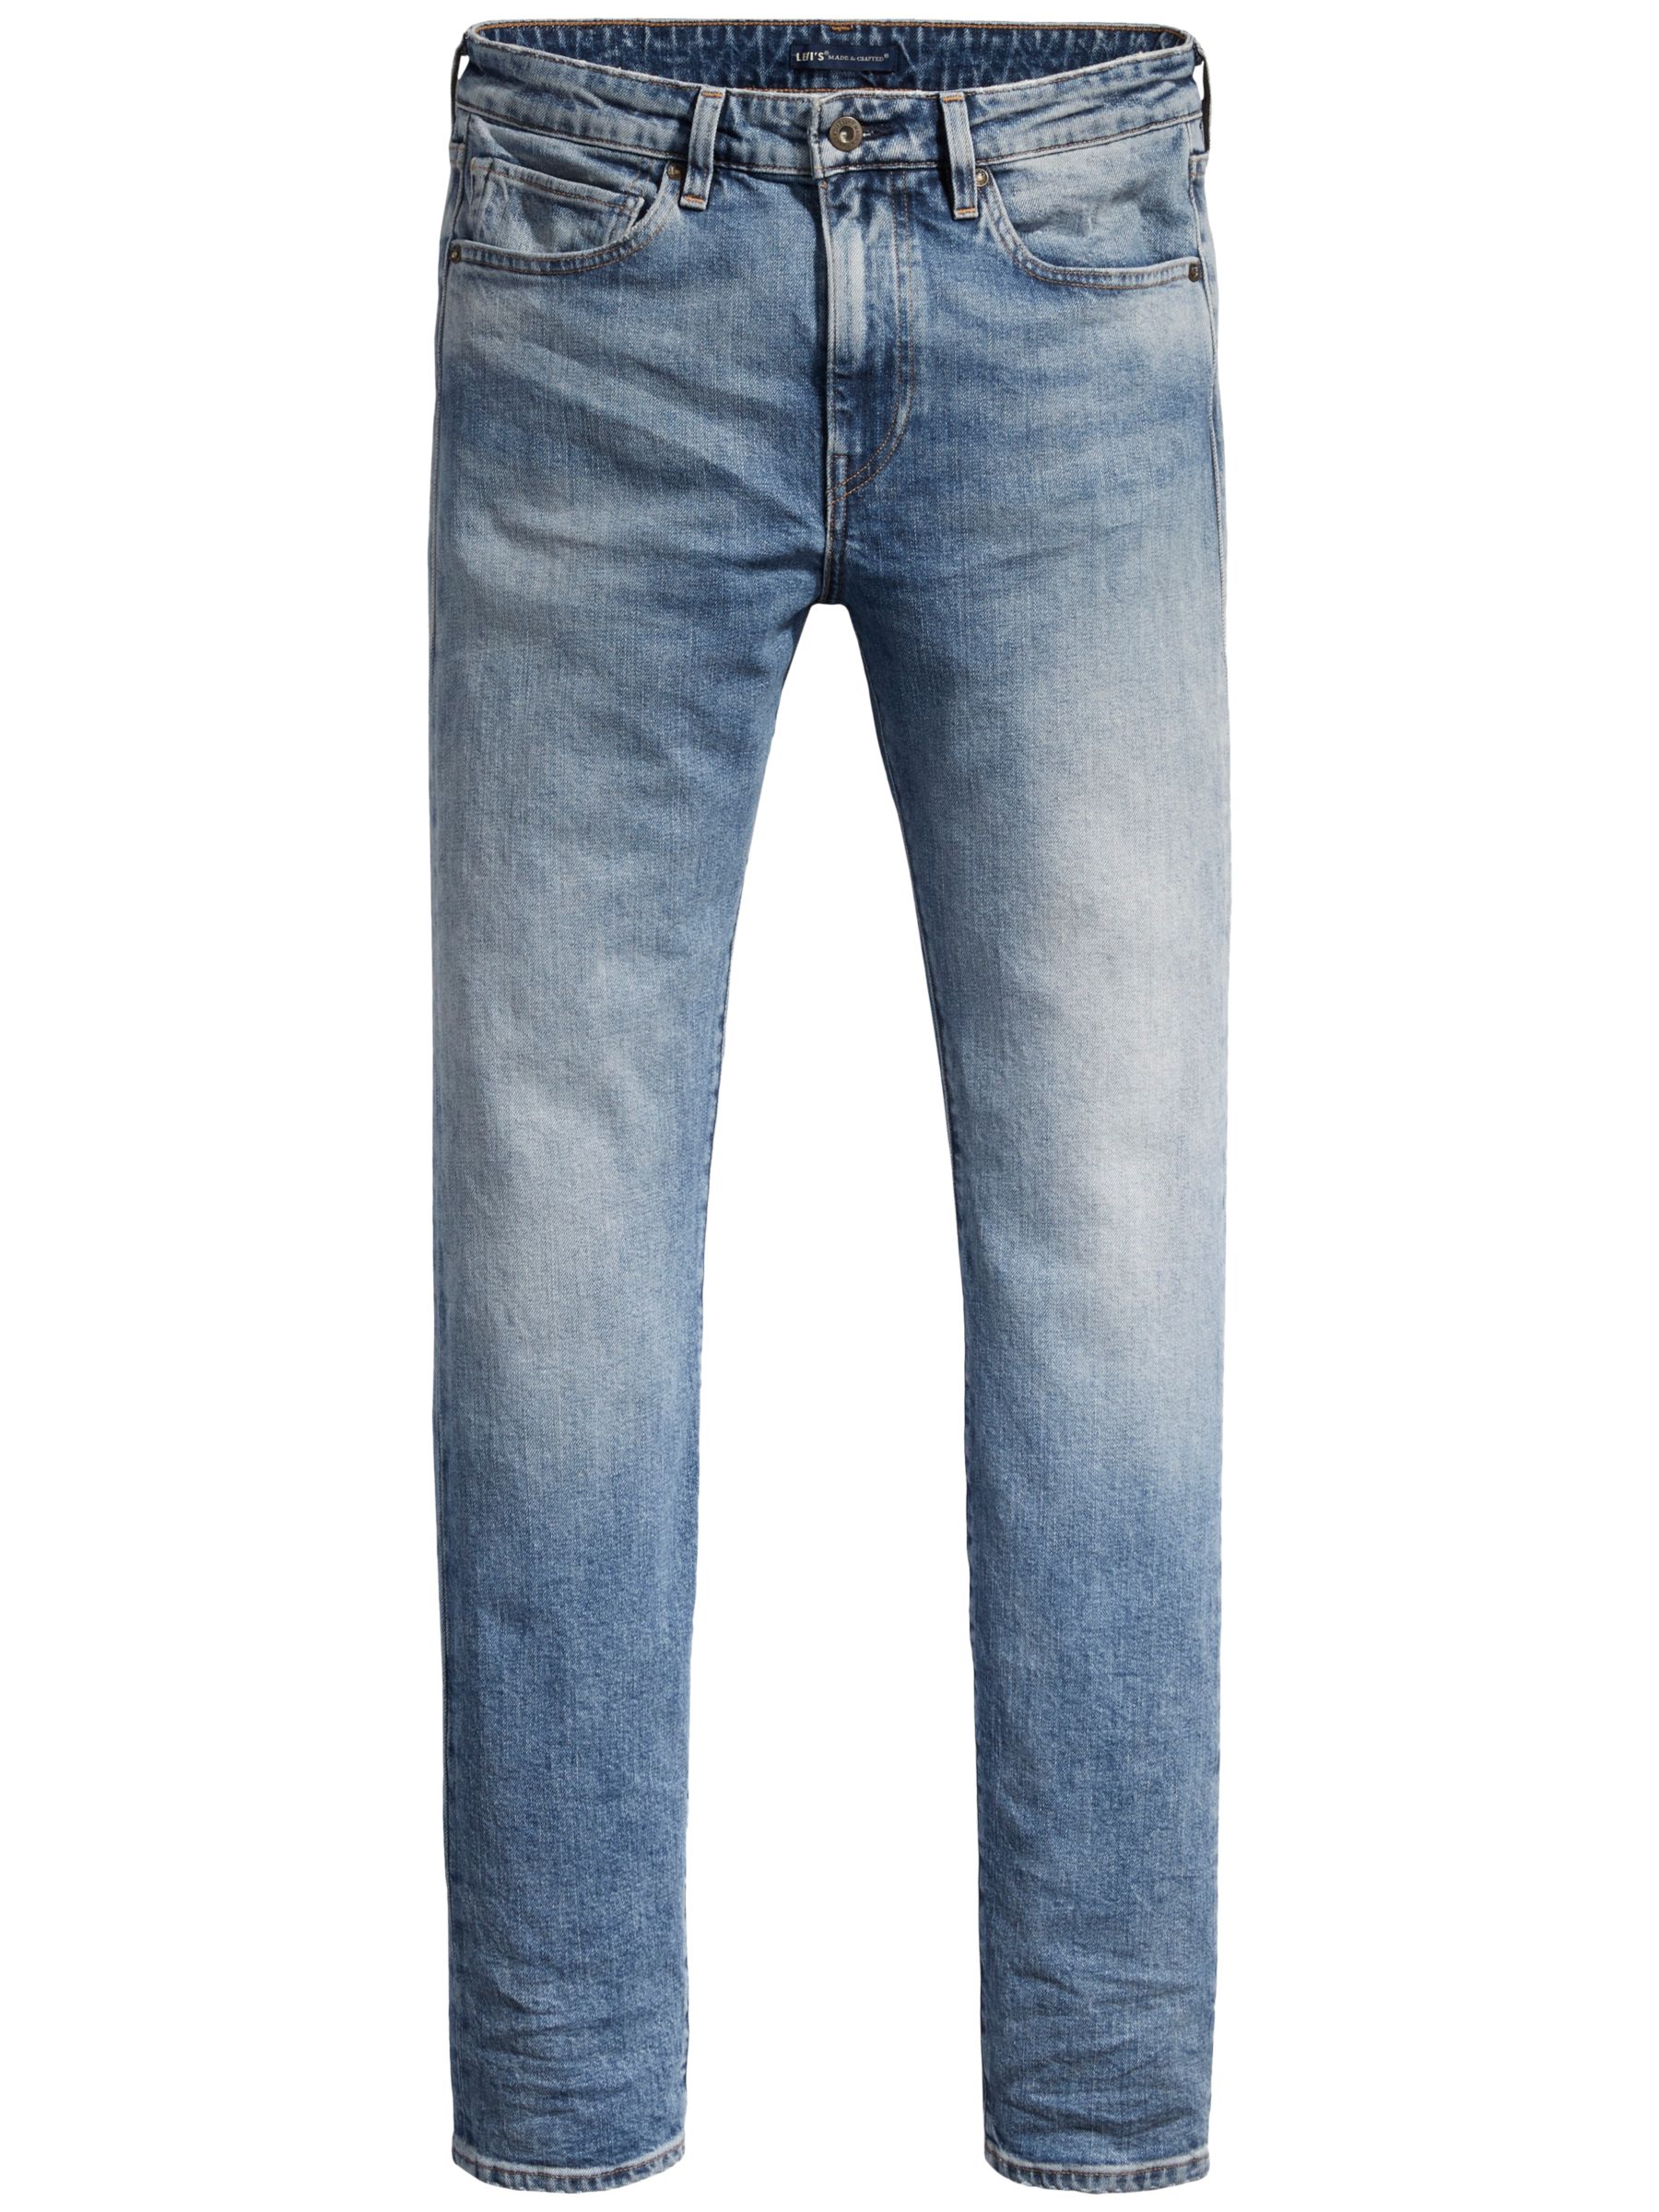 Descubrir 65+ imagen levi’s made and crafted needle narrow